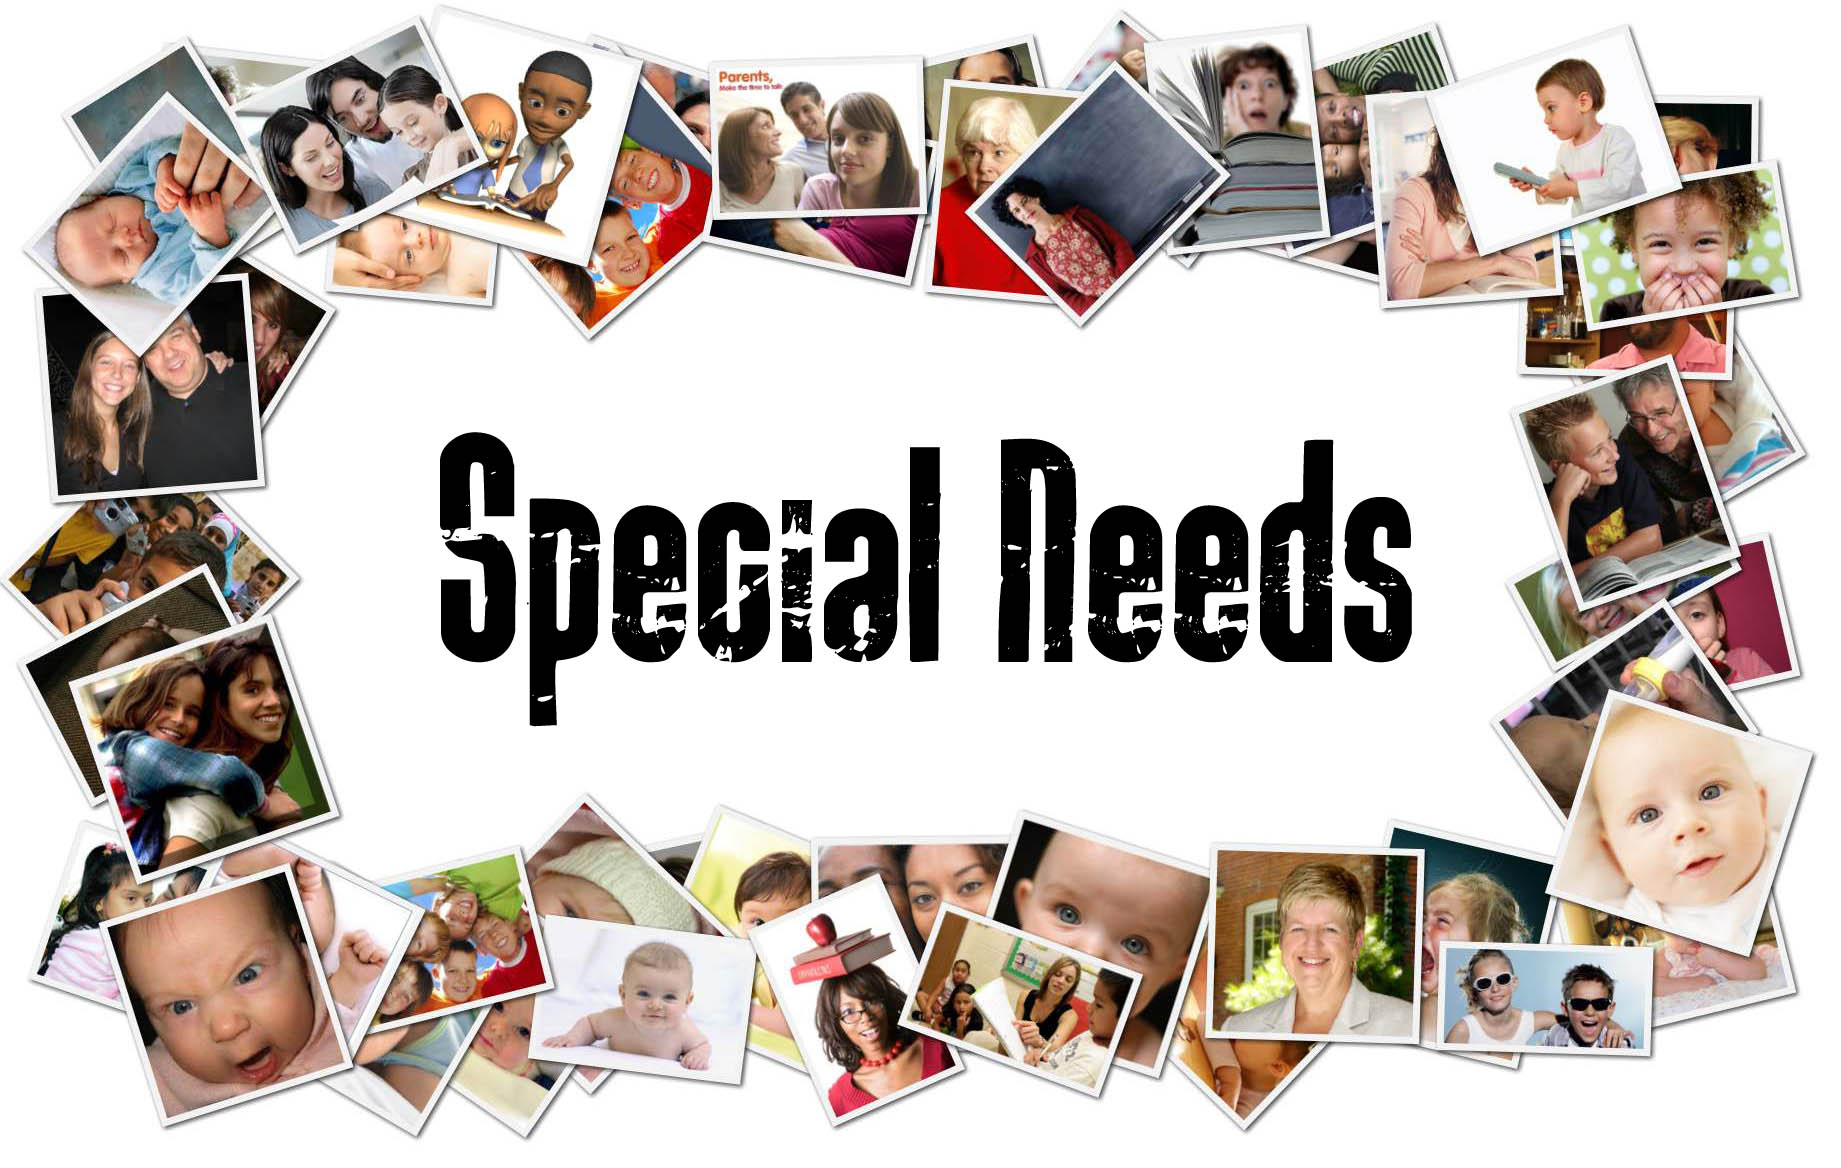 Care for those with Special Needs